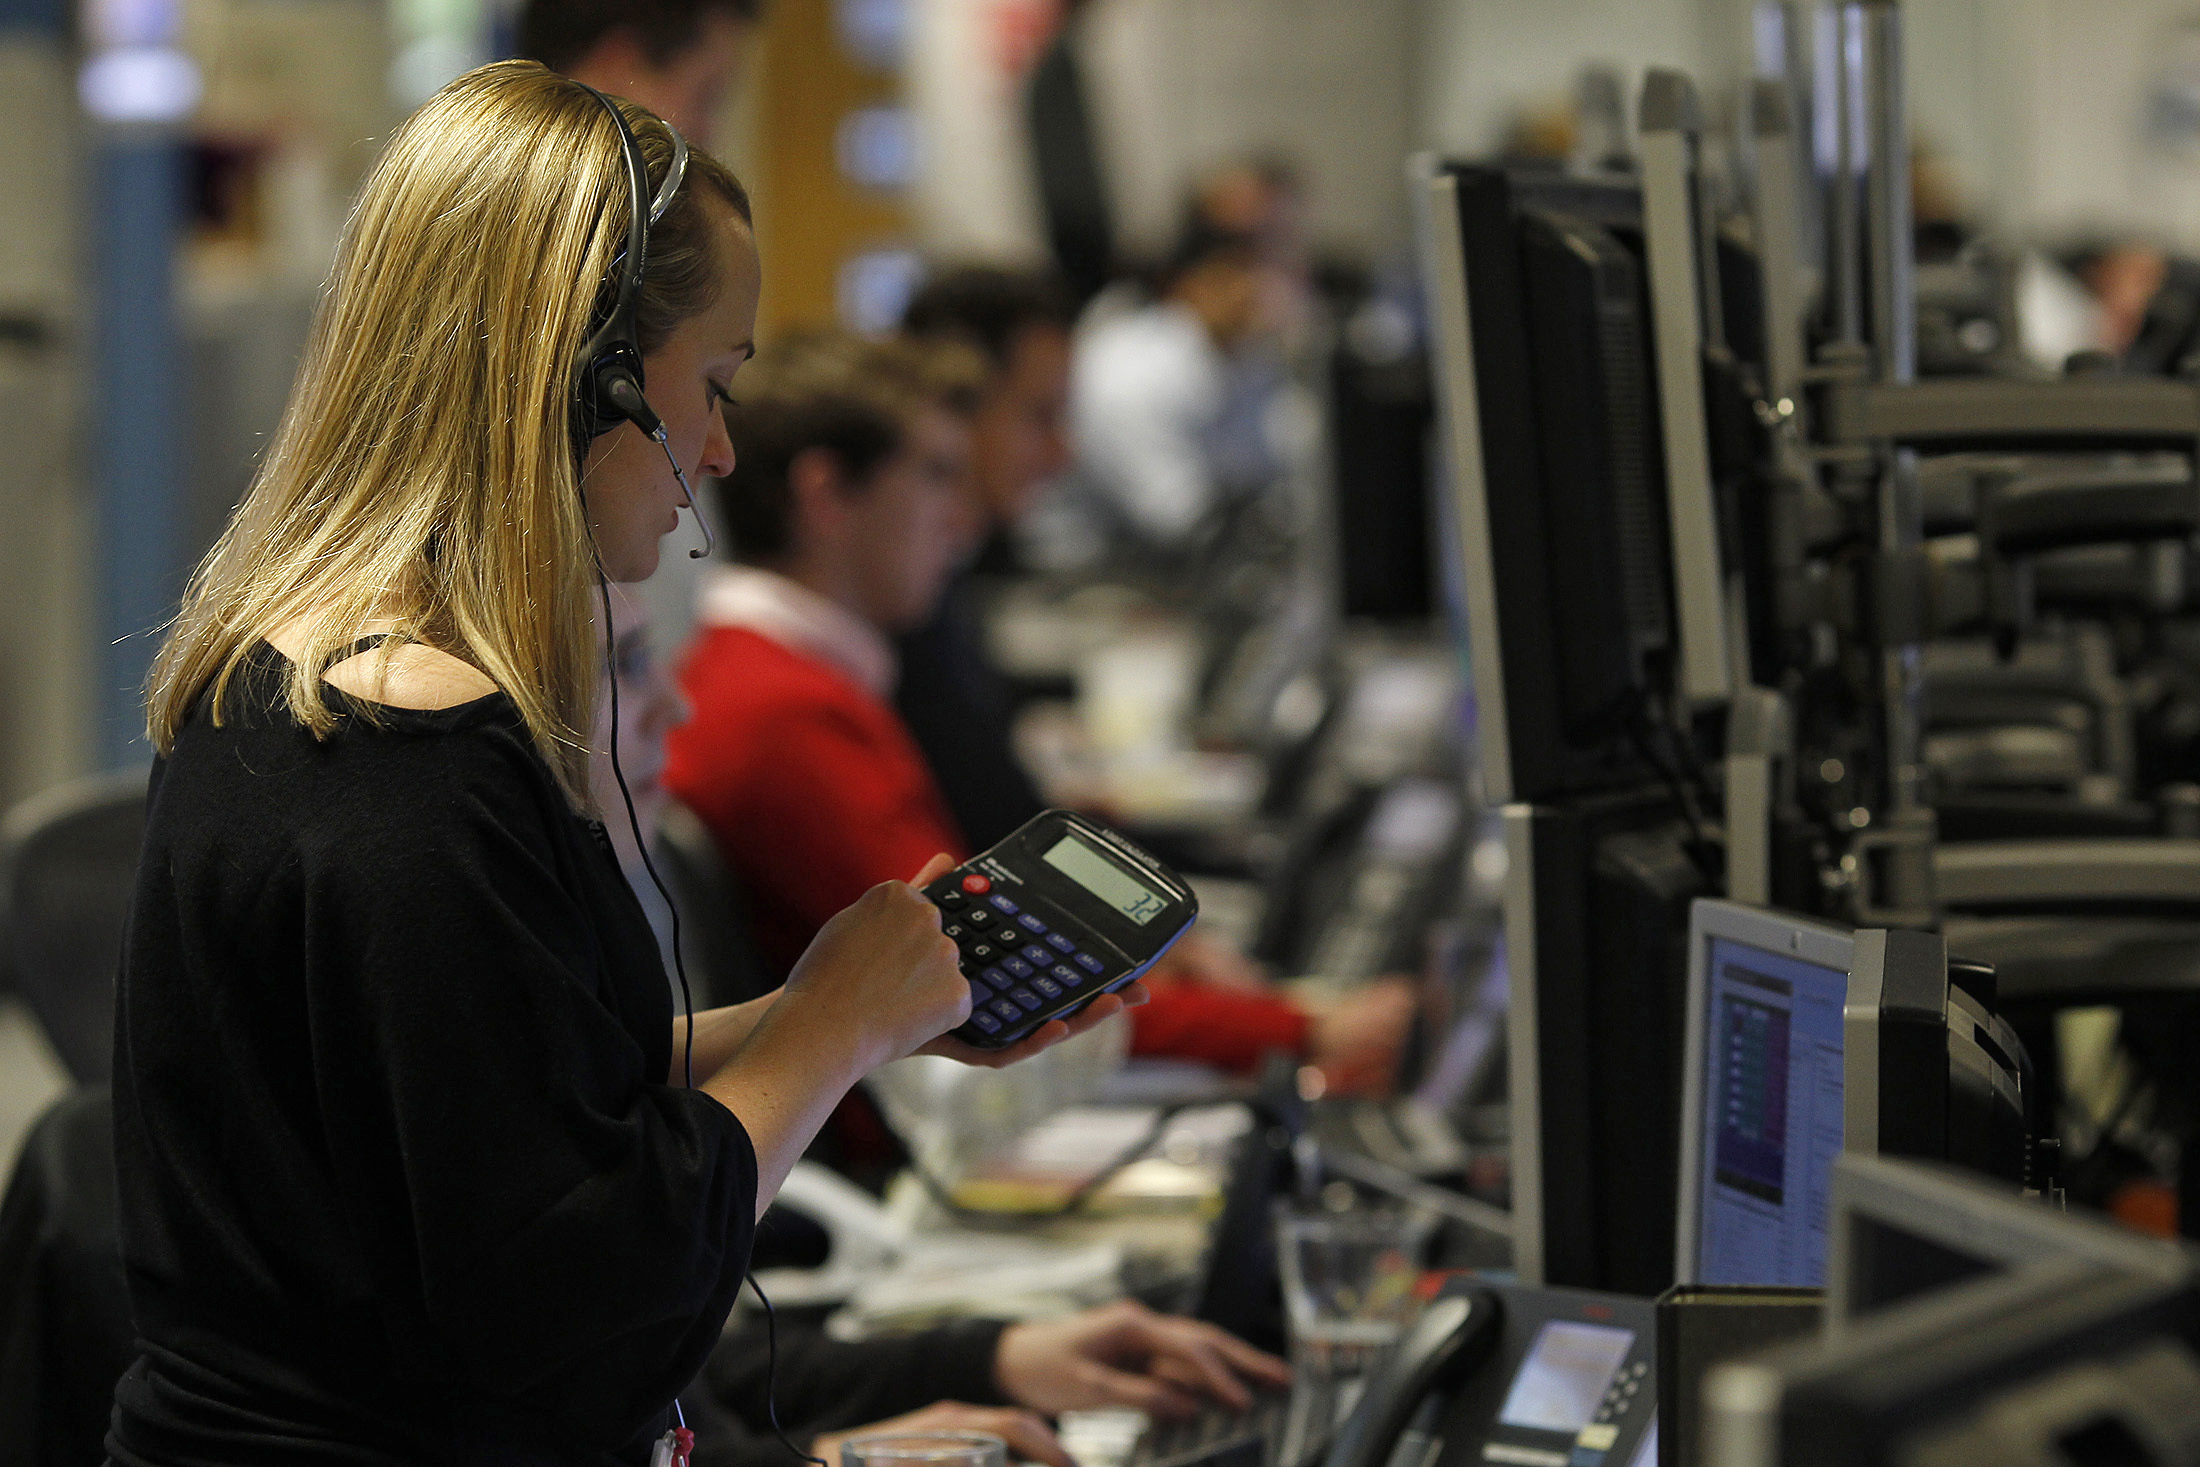 A trader works on the trading floor in London